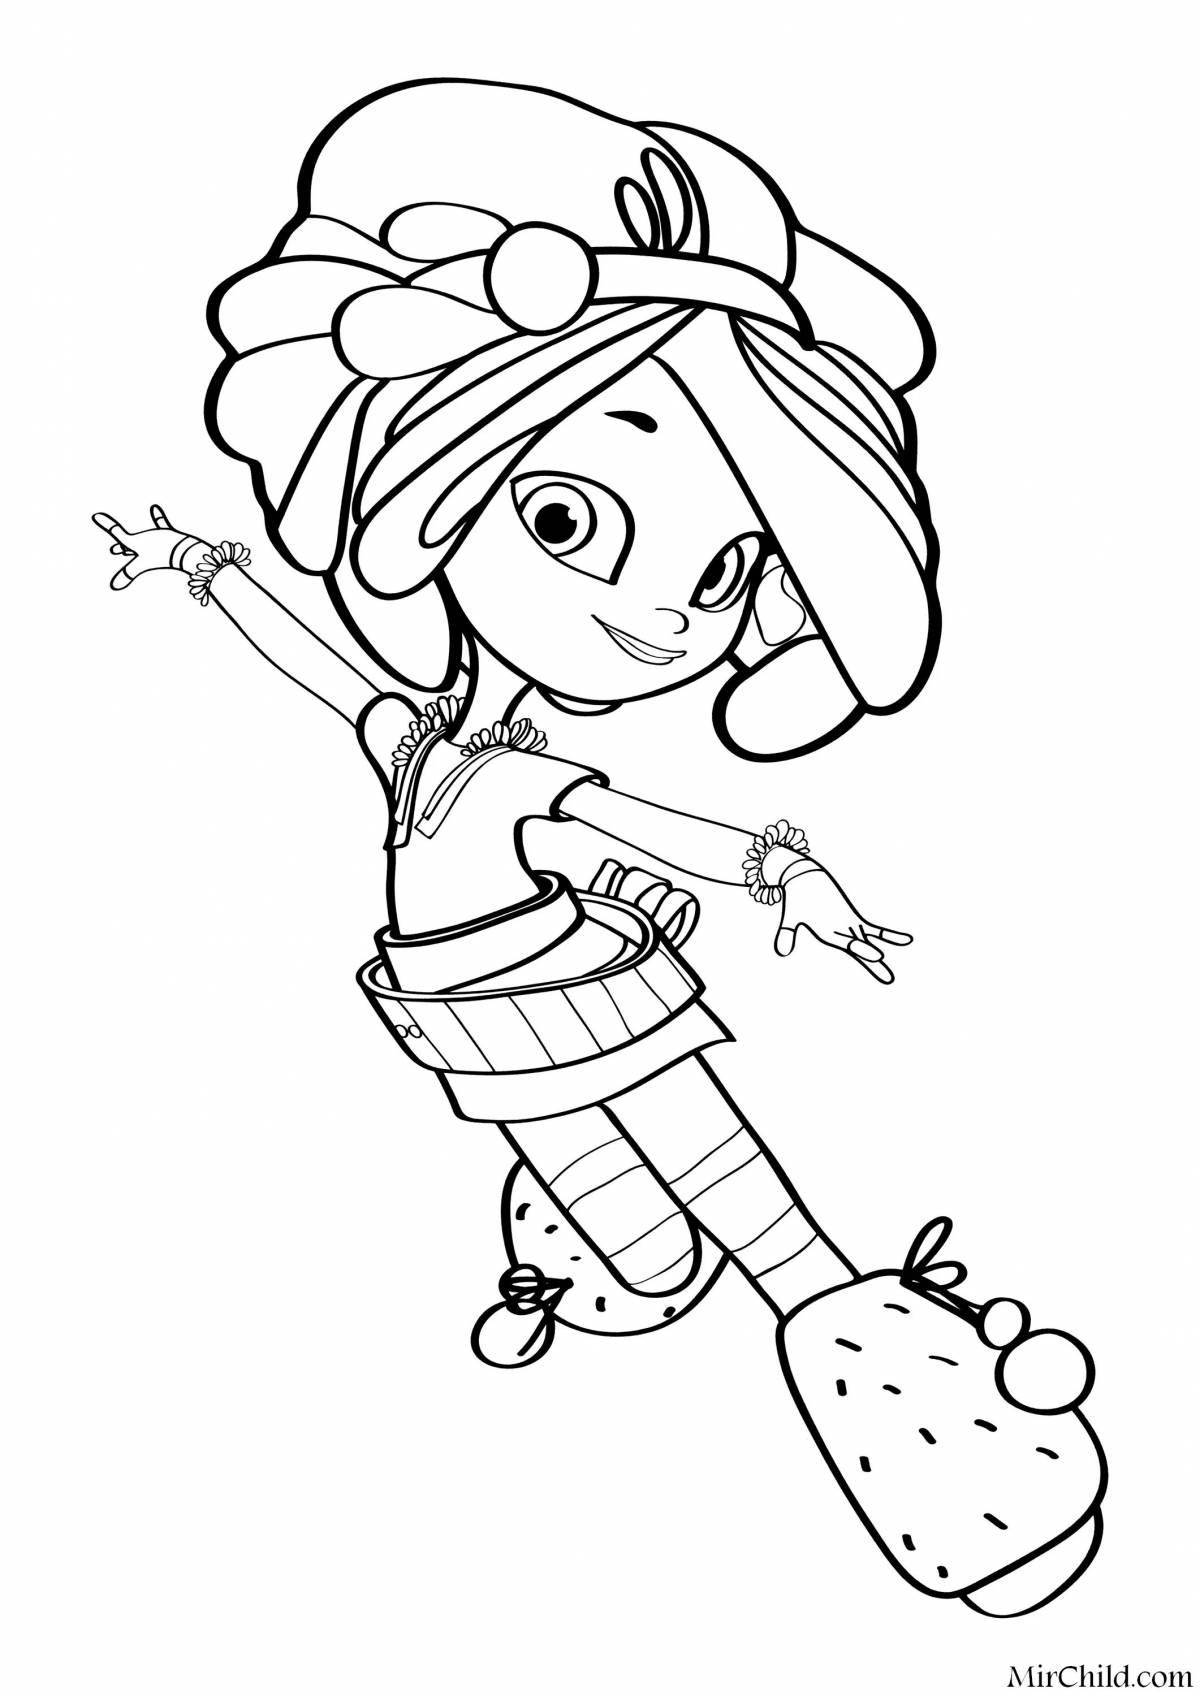 Fantastic coloring pages fairy tale patrol, new series